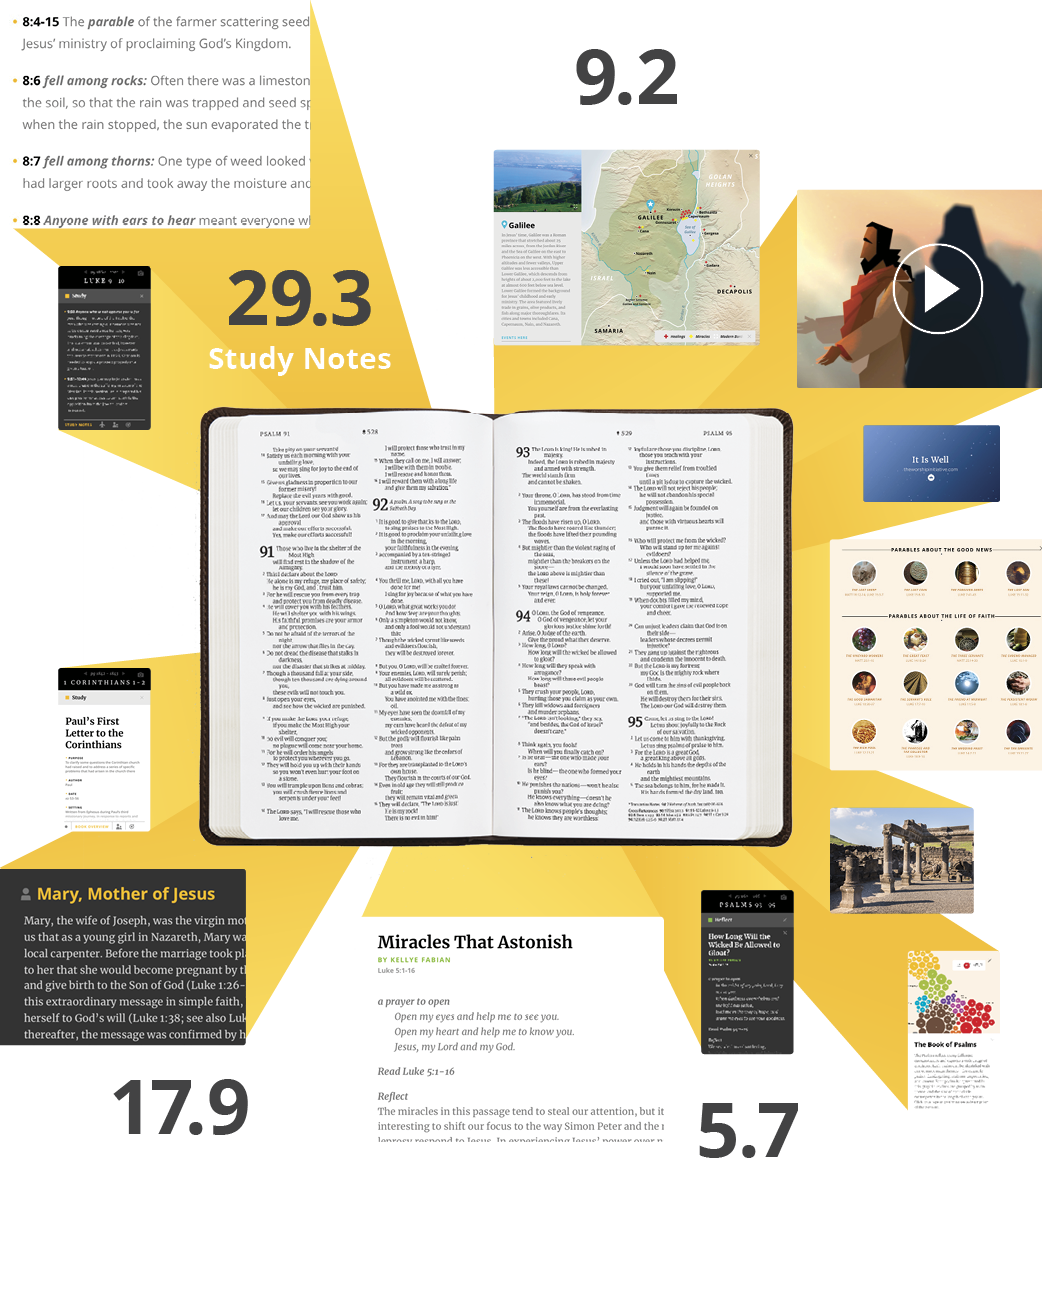 On average, each page links to 19 study notes, 11 profile and theme notes, 4 interactive videos and visuals, and 2 devotionals.